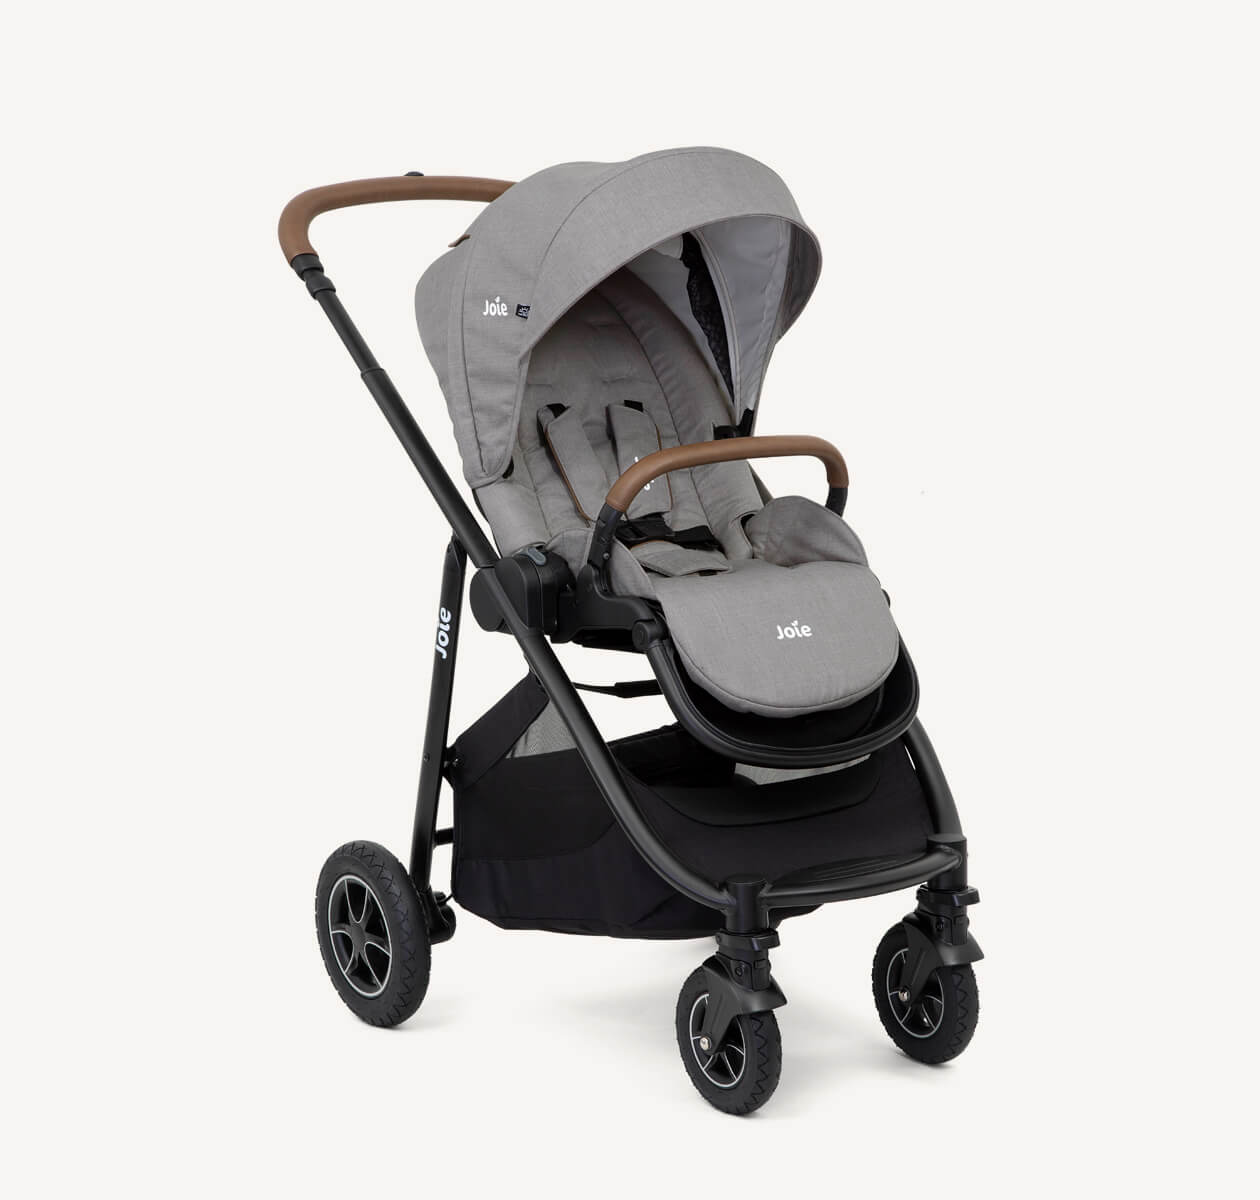  Joie light gray and black versatrax pram positioned at a right angle.